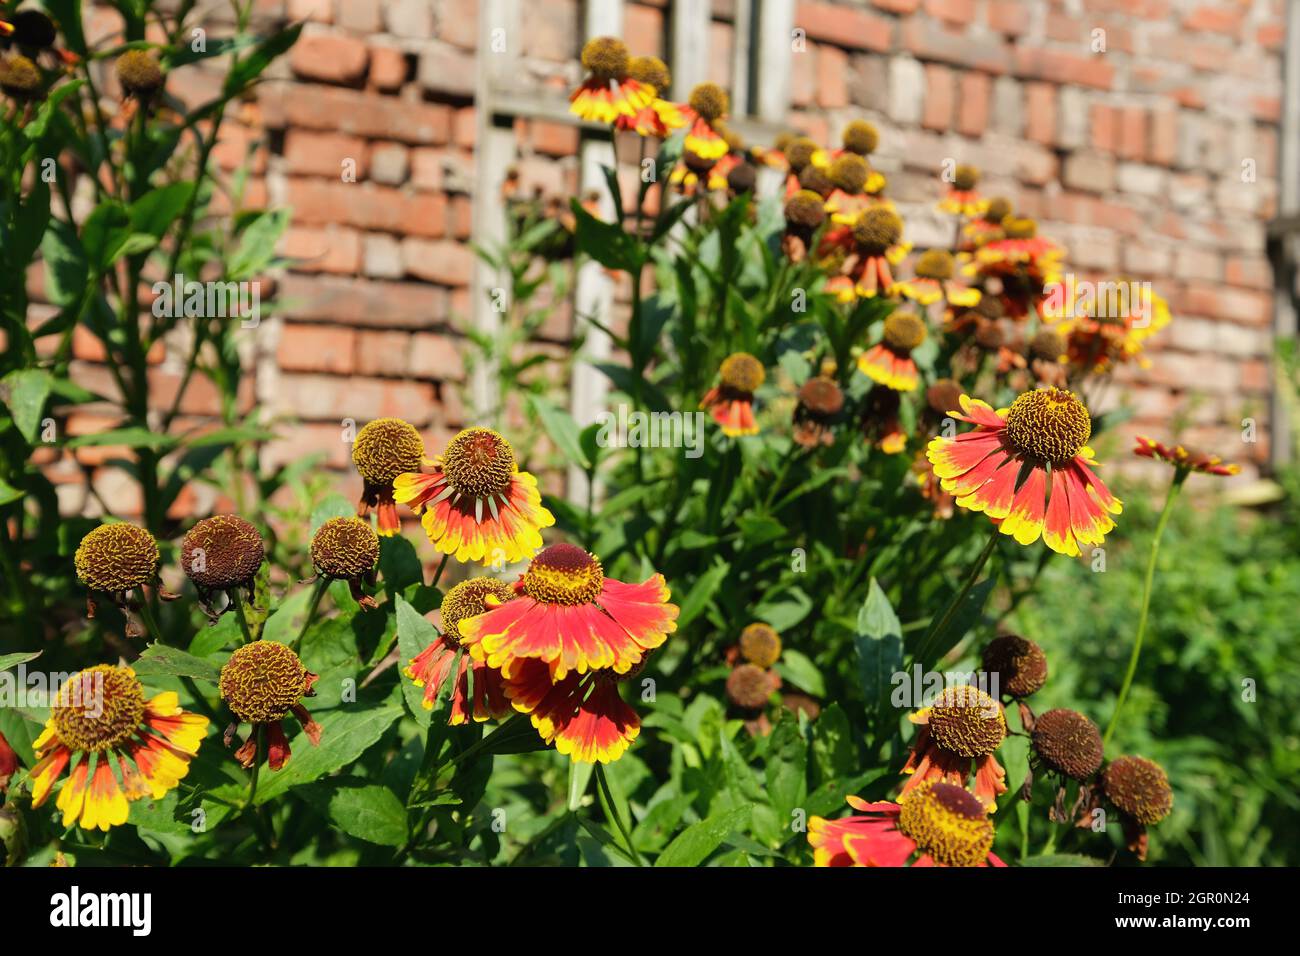 Selective focus shot of flowers in the garden on a brick wall background Stock Photo